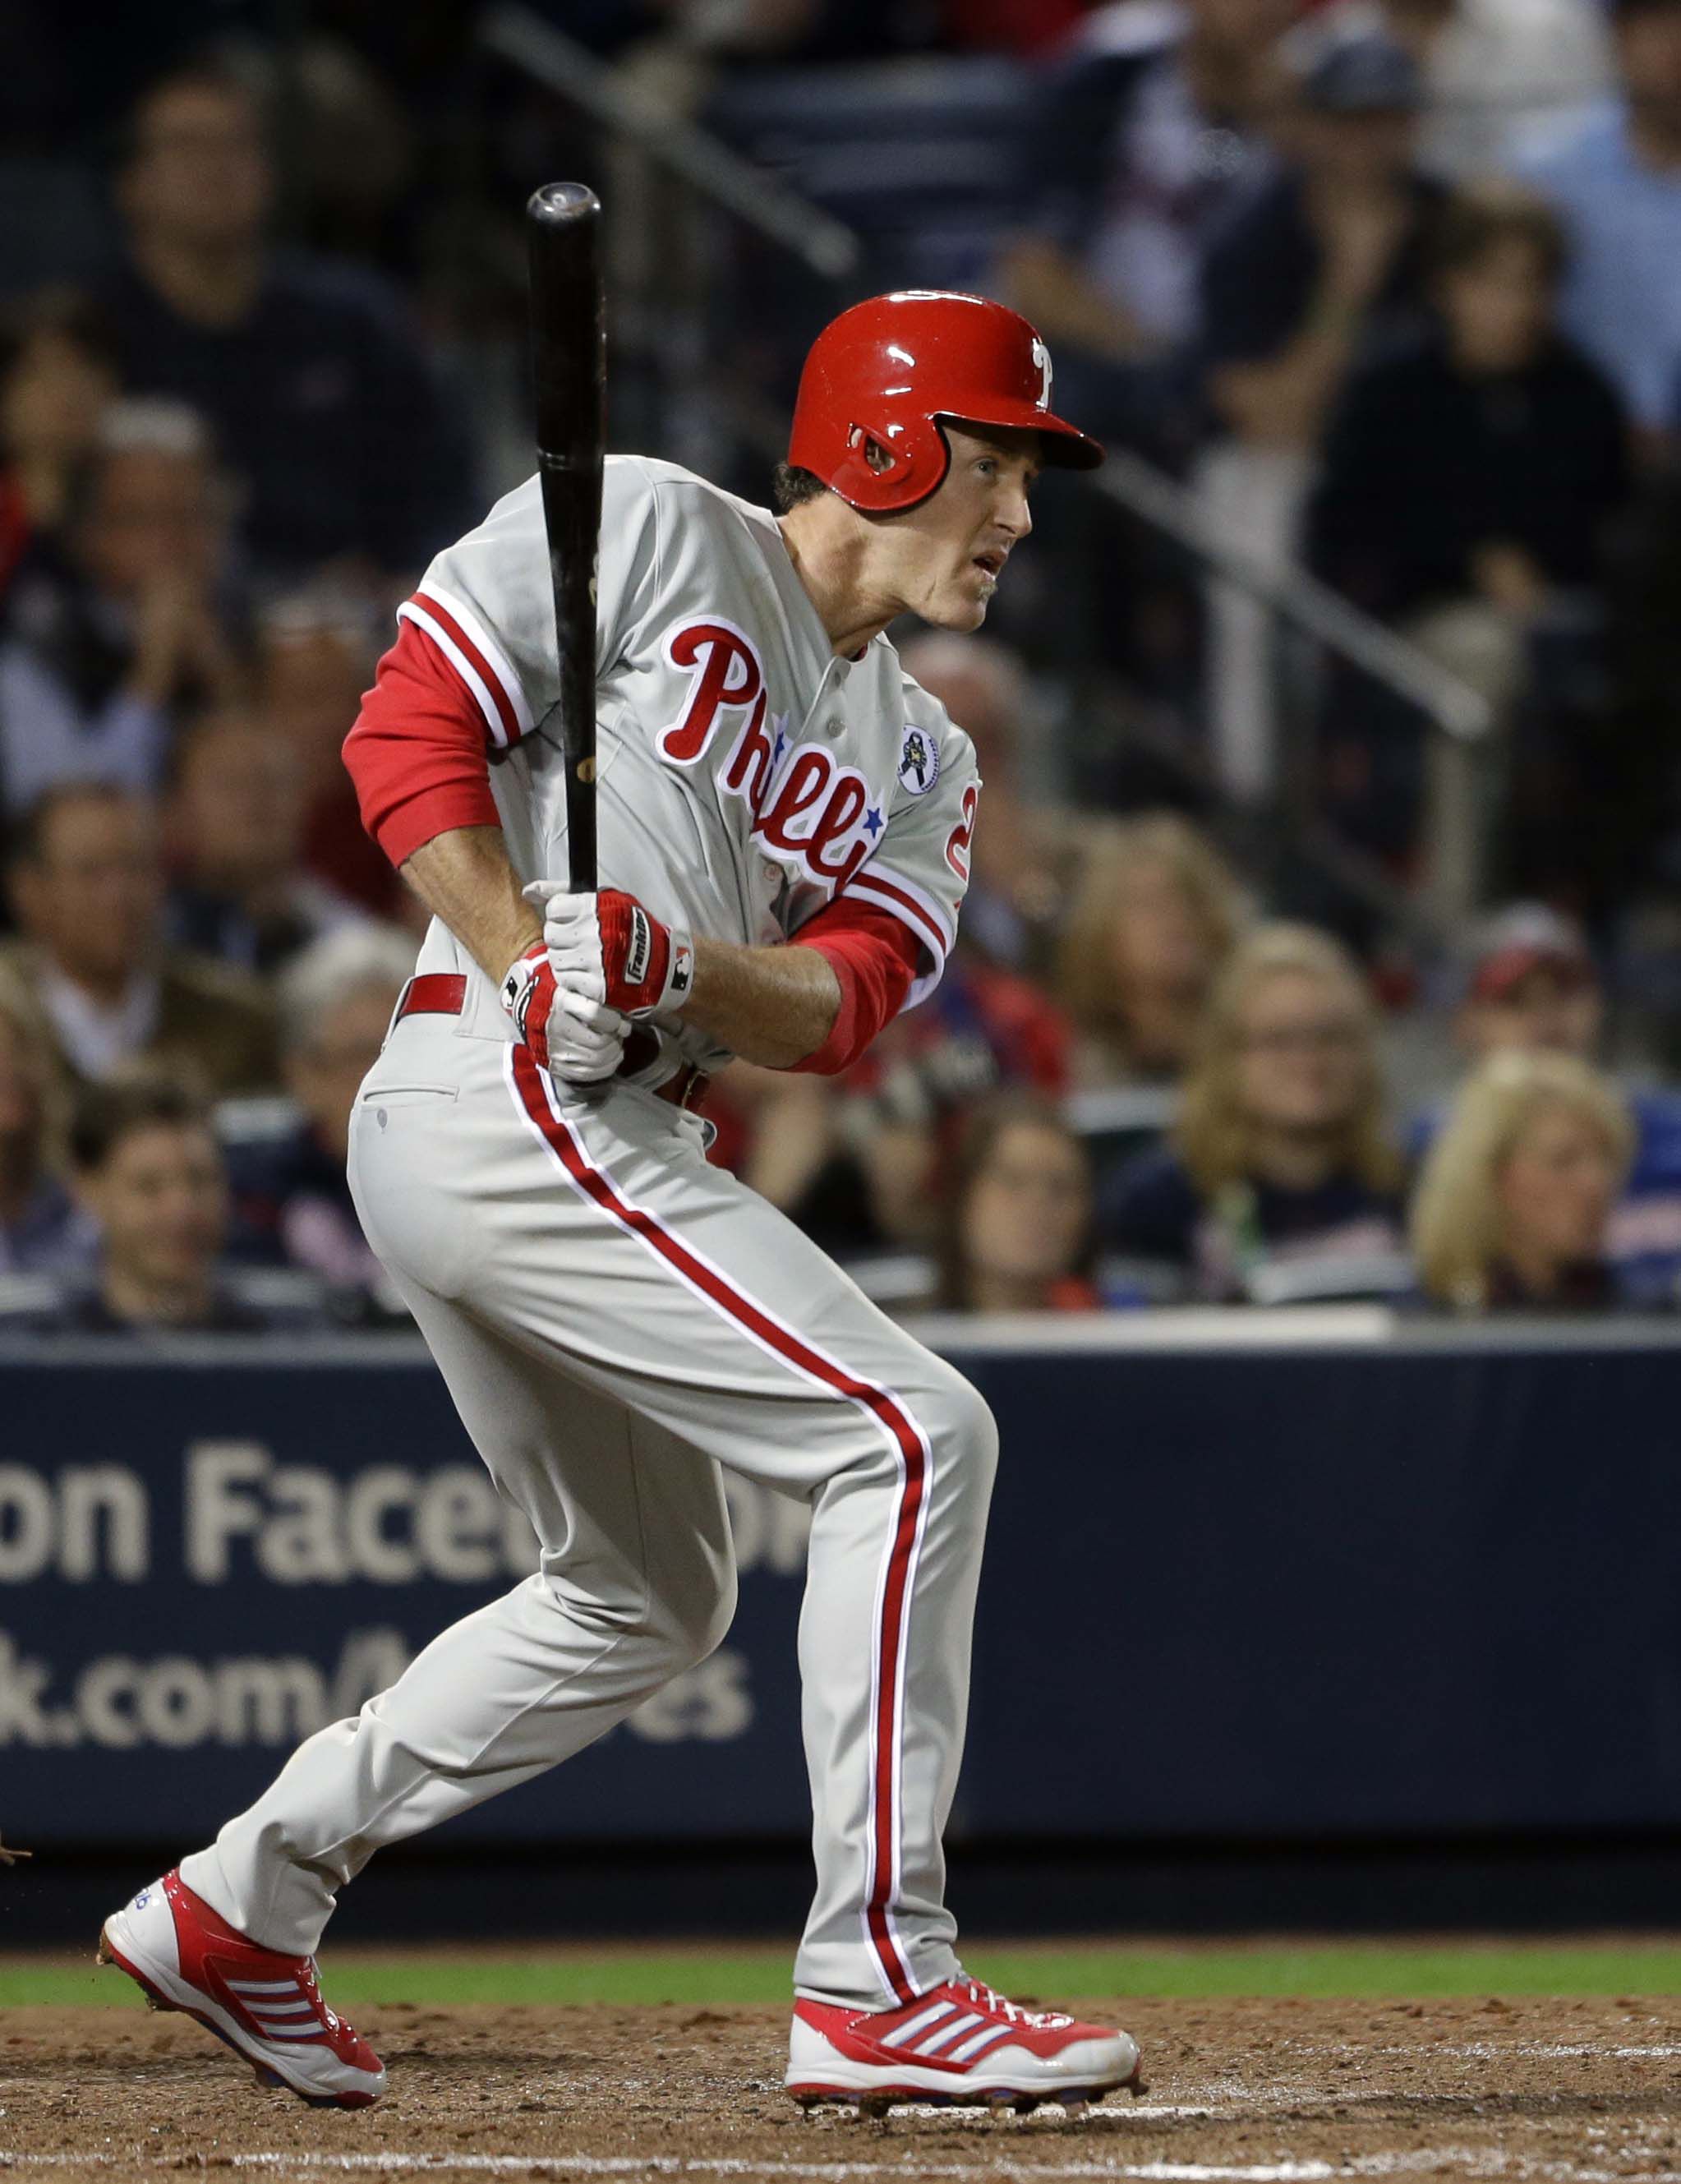 A bad day for Phillies' Chase Utley, Tigers' Miguel Cabrera